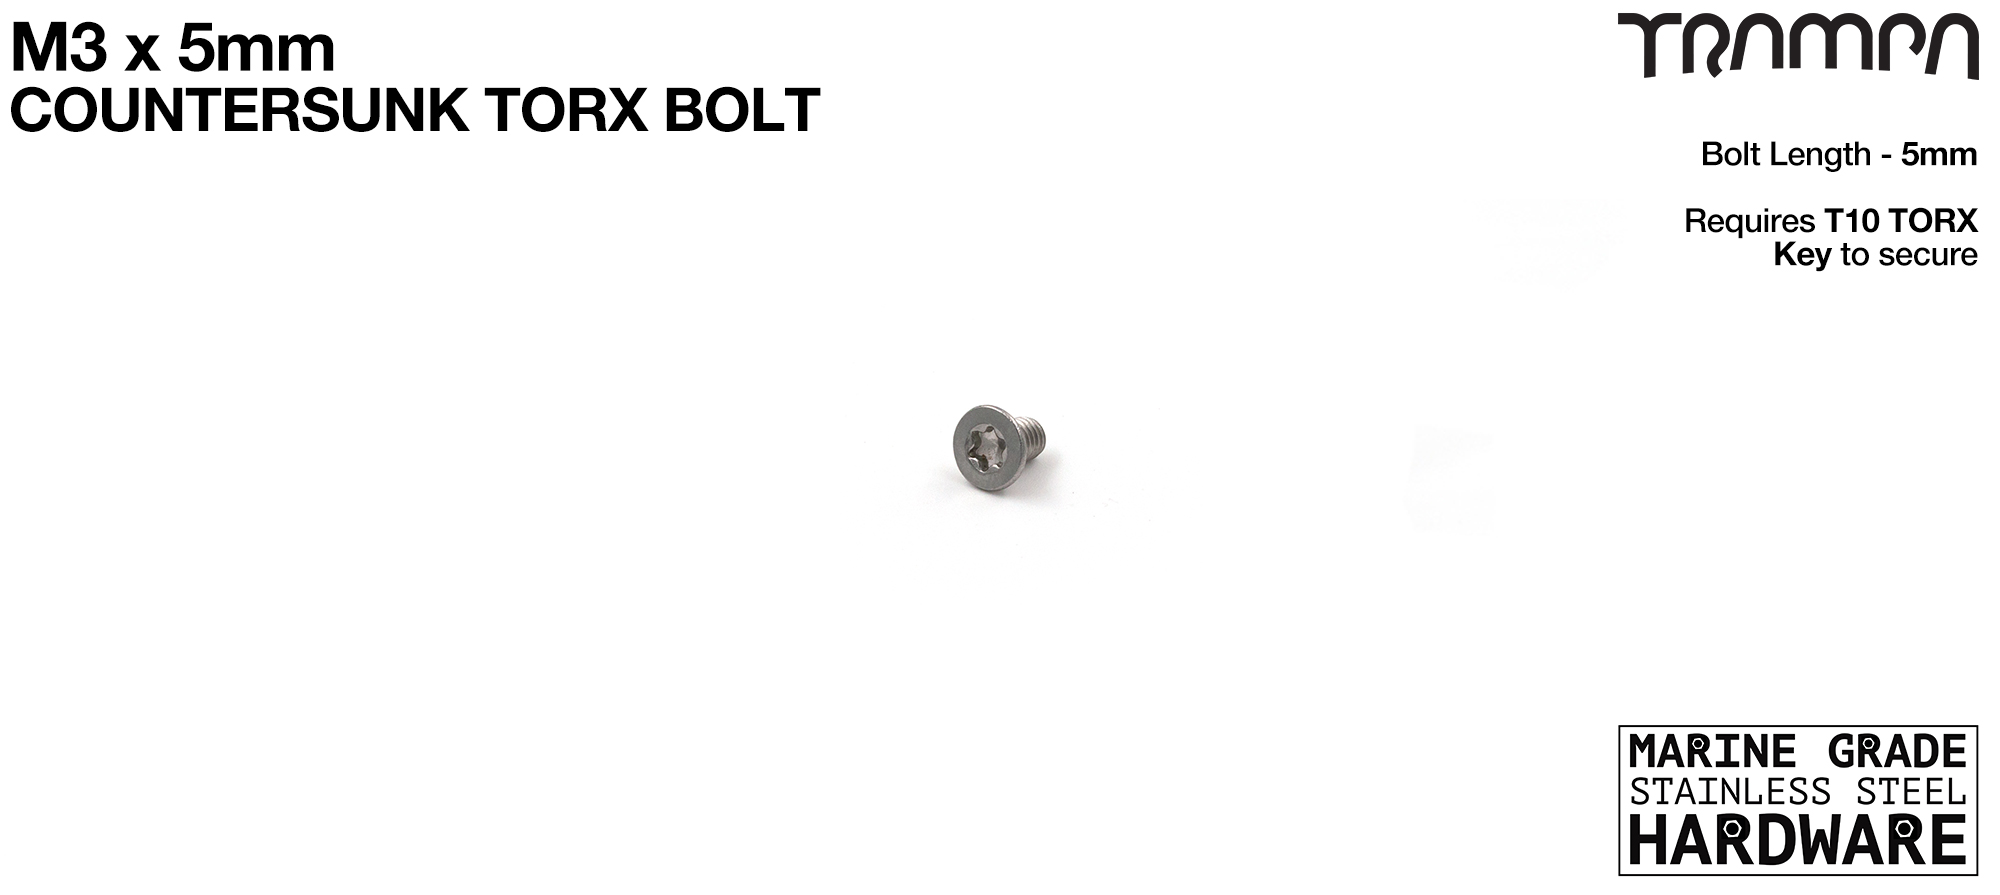 M3 x 5mm TORX Countersunk Bolt - Marine Grade Stainless steel with TORX Fitting